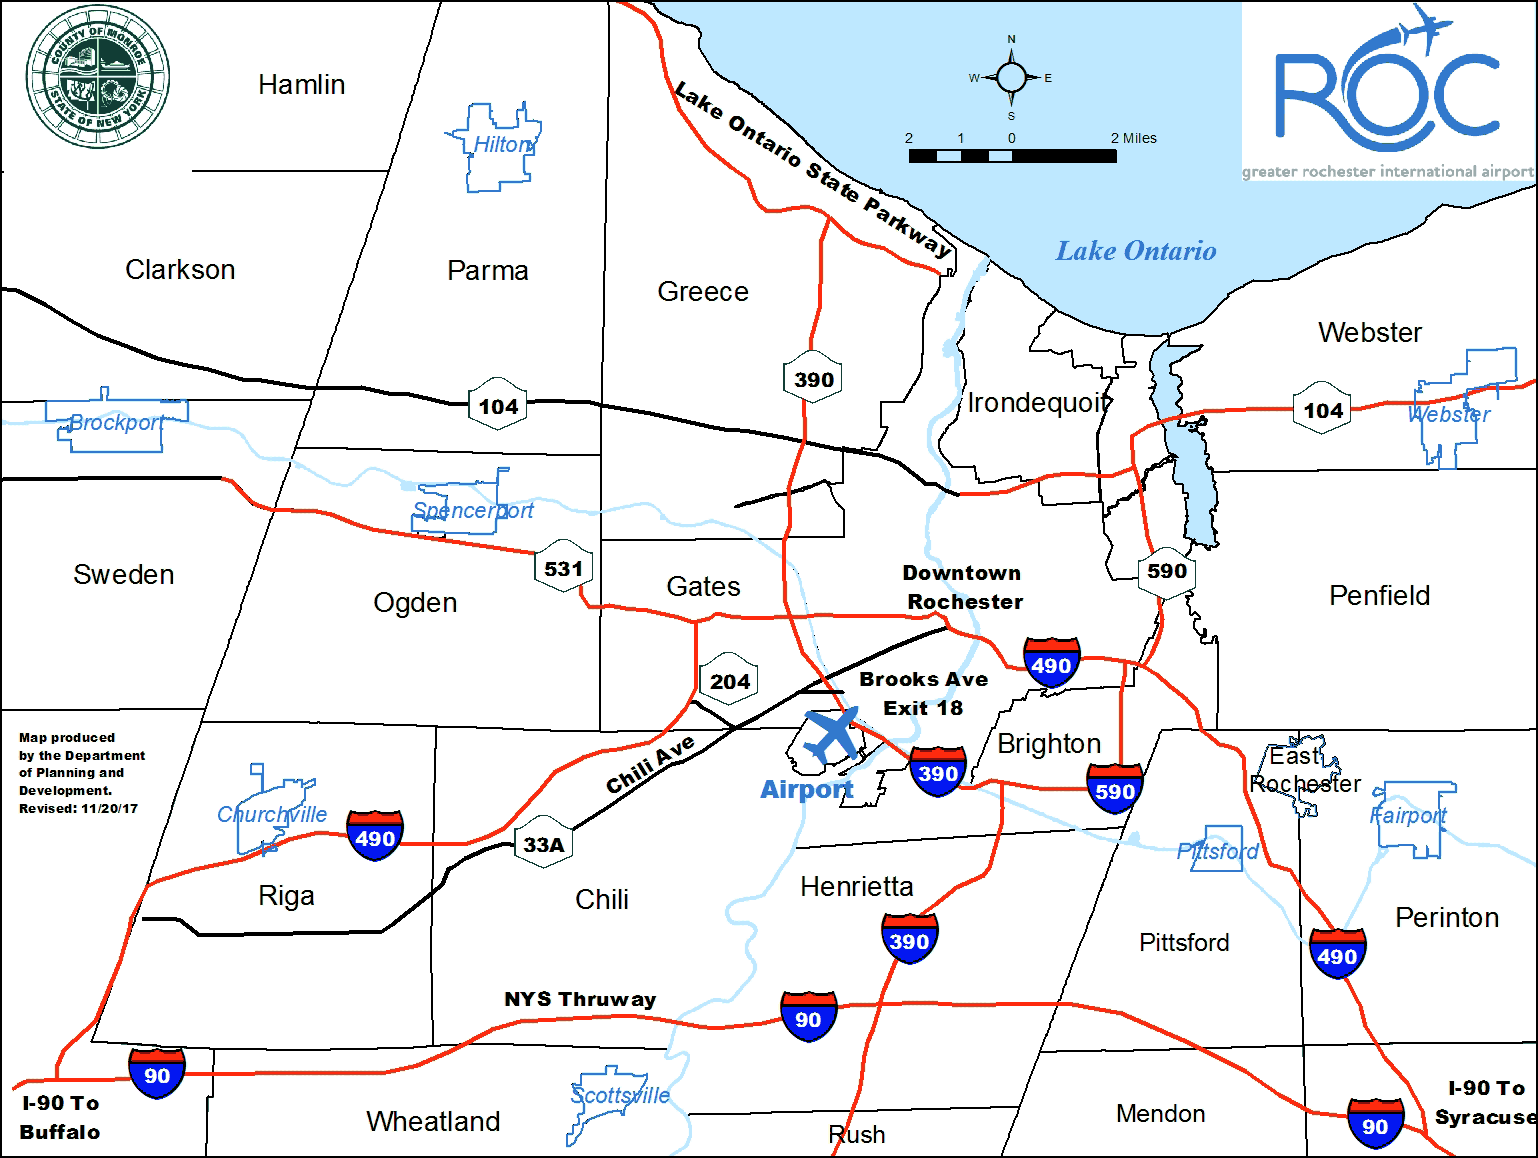 Map to ROC